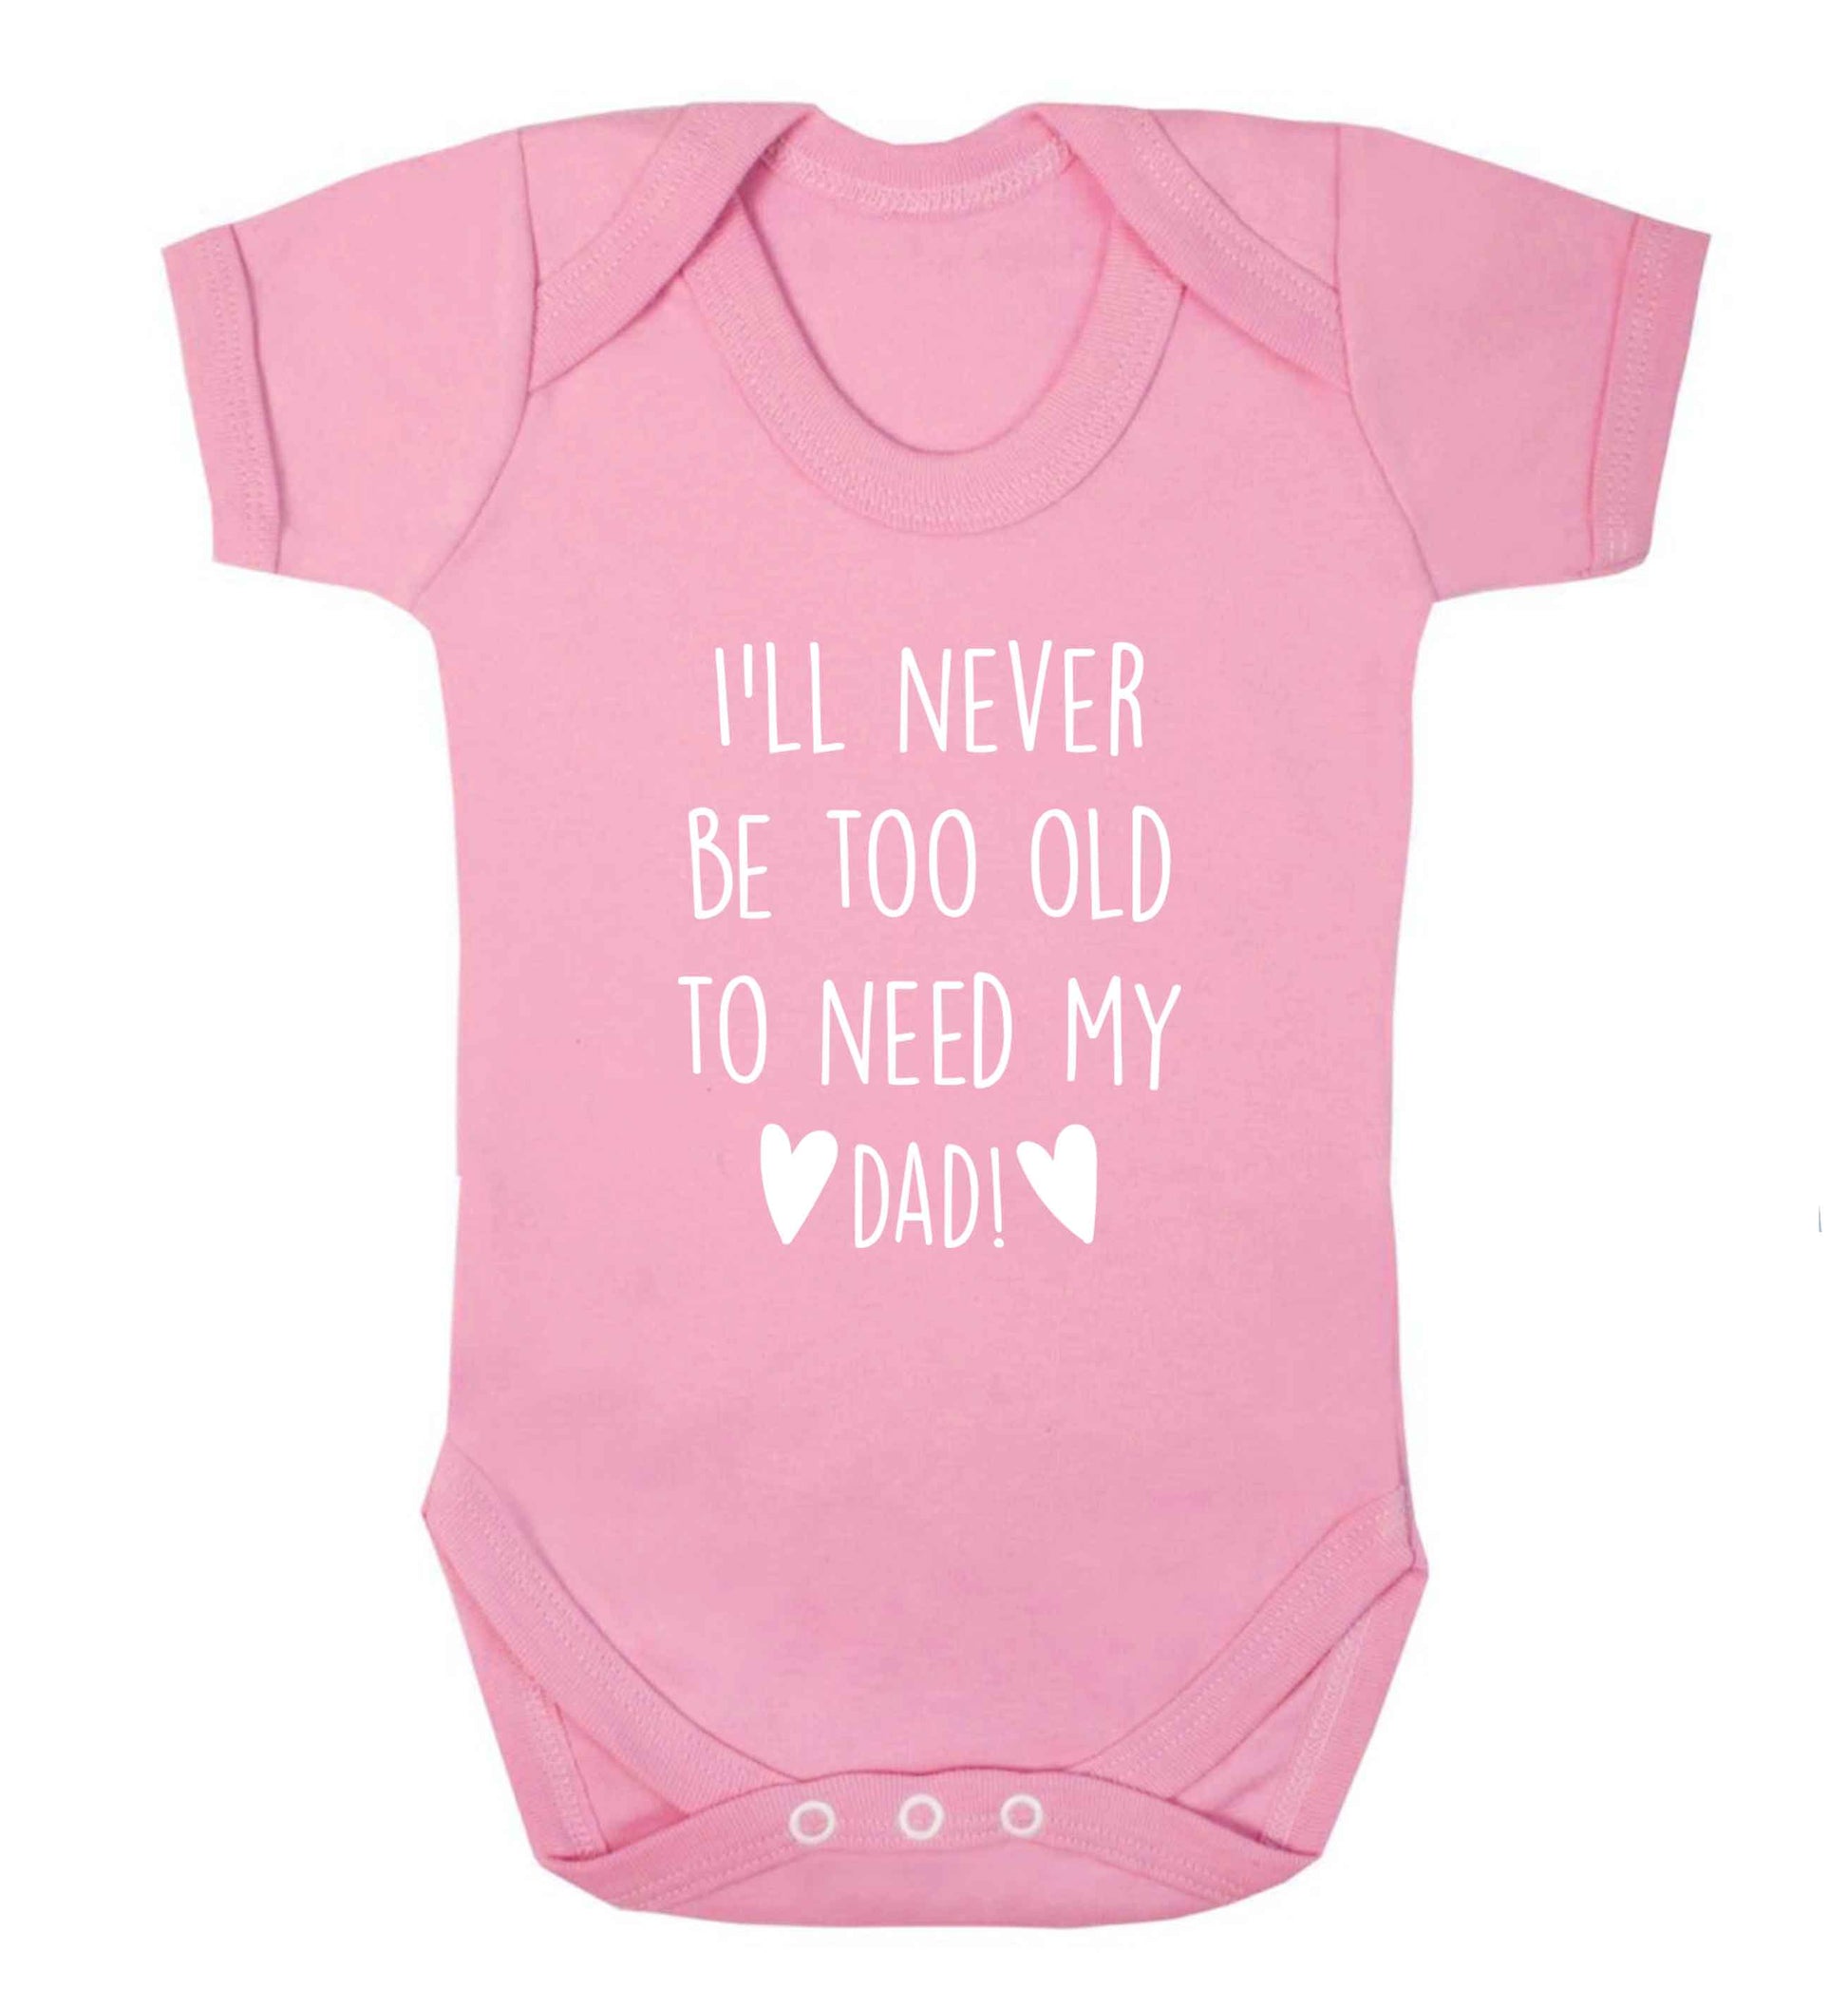 I'll never be too old to need my dad baby vest pale pink 18-24 months